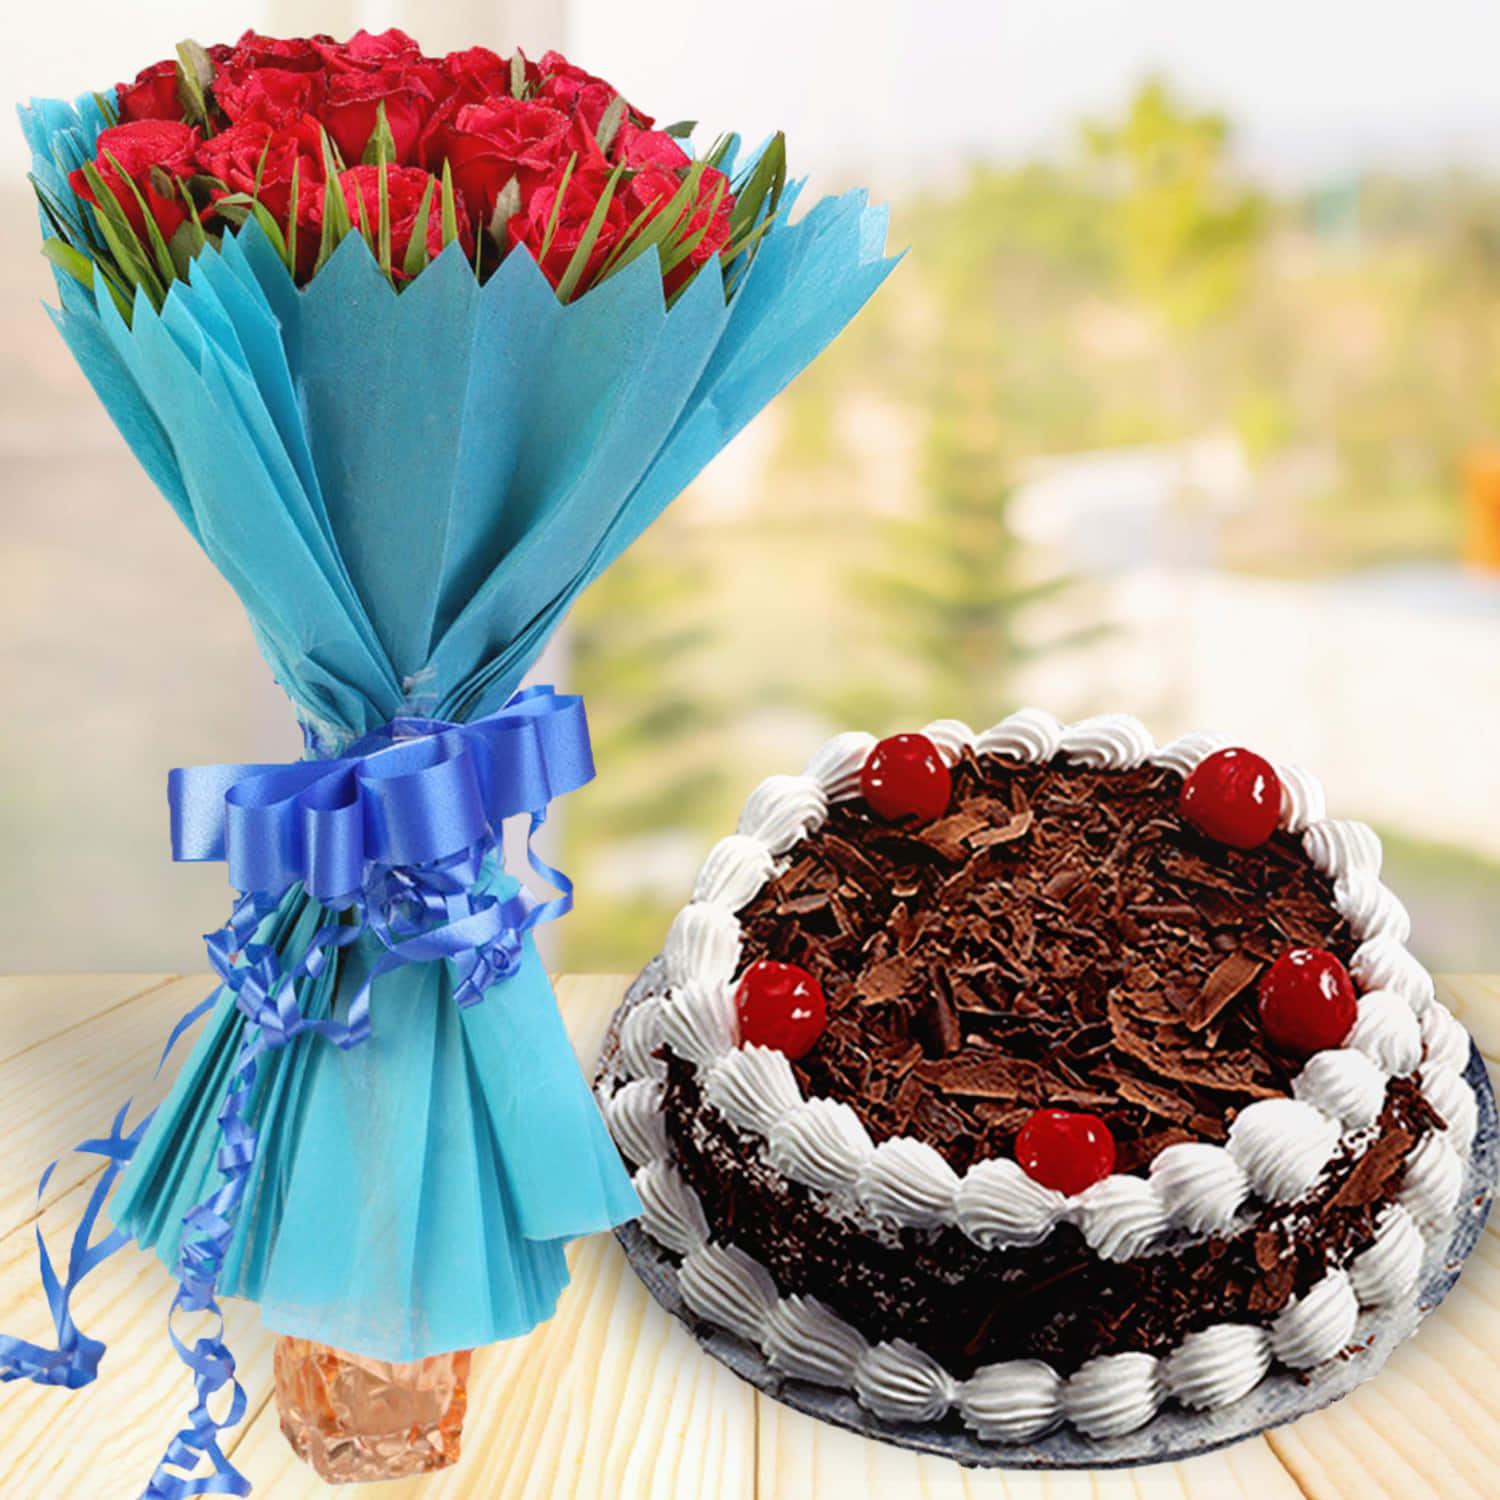 1 Online Cake and Flower Delivery in Bangalore, Order & Send now | Winni |  Cool birthday cakes, Online cake delivery, Send birthday cake